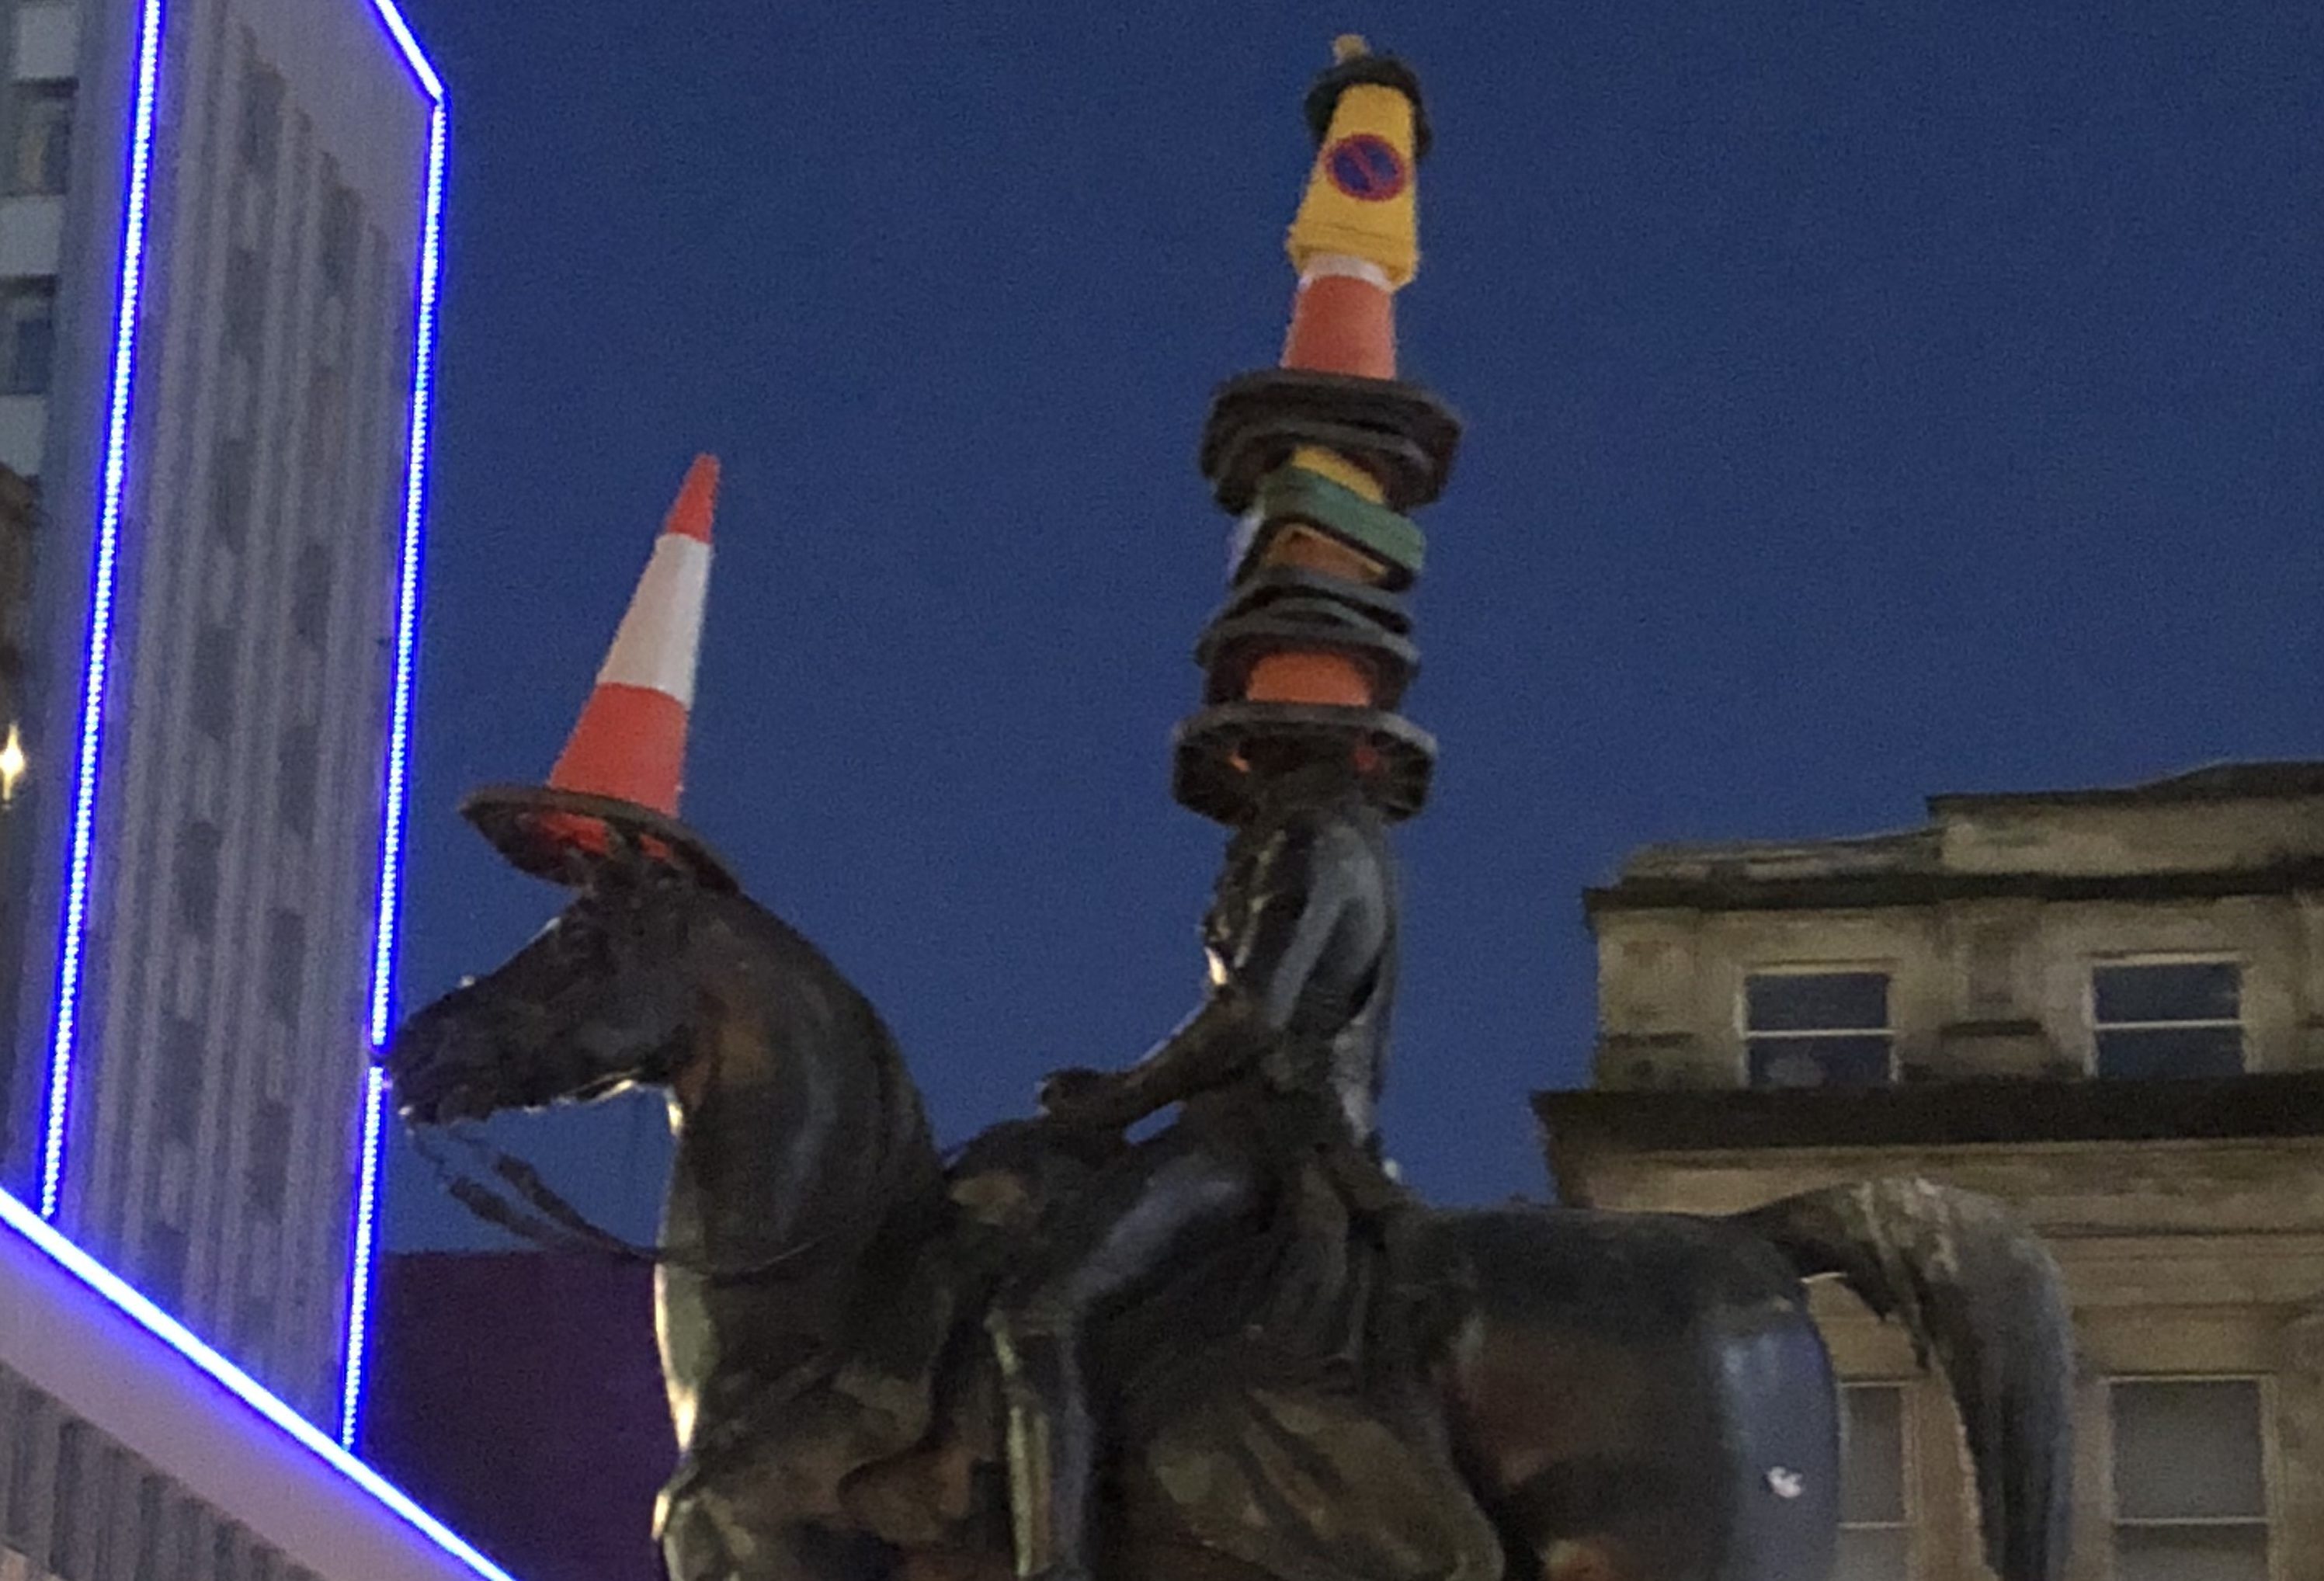 The cone pile stands tall following Sunday's TRNSMT festival (Ross Crae / DC Thomson)